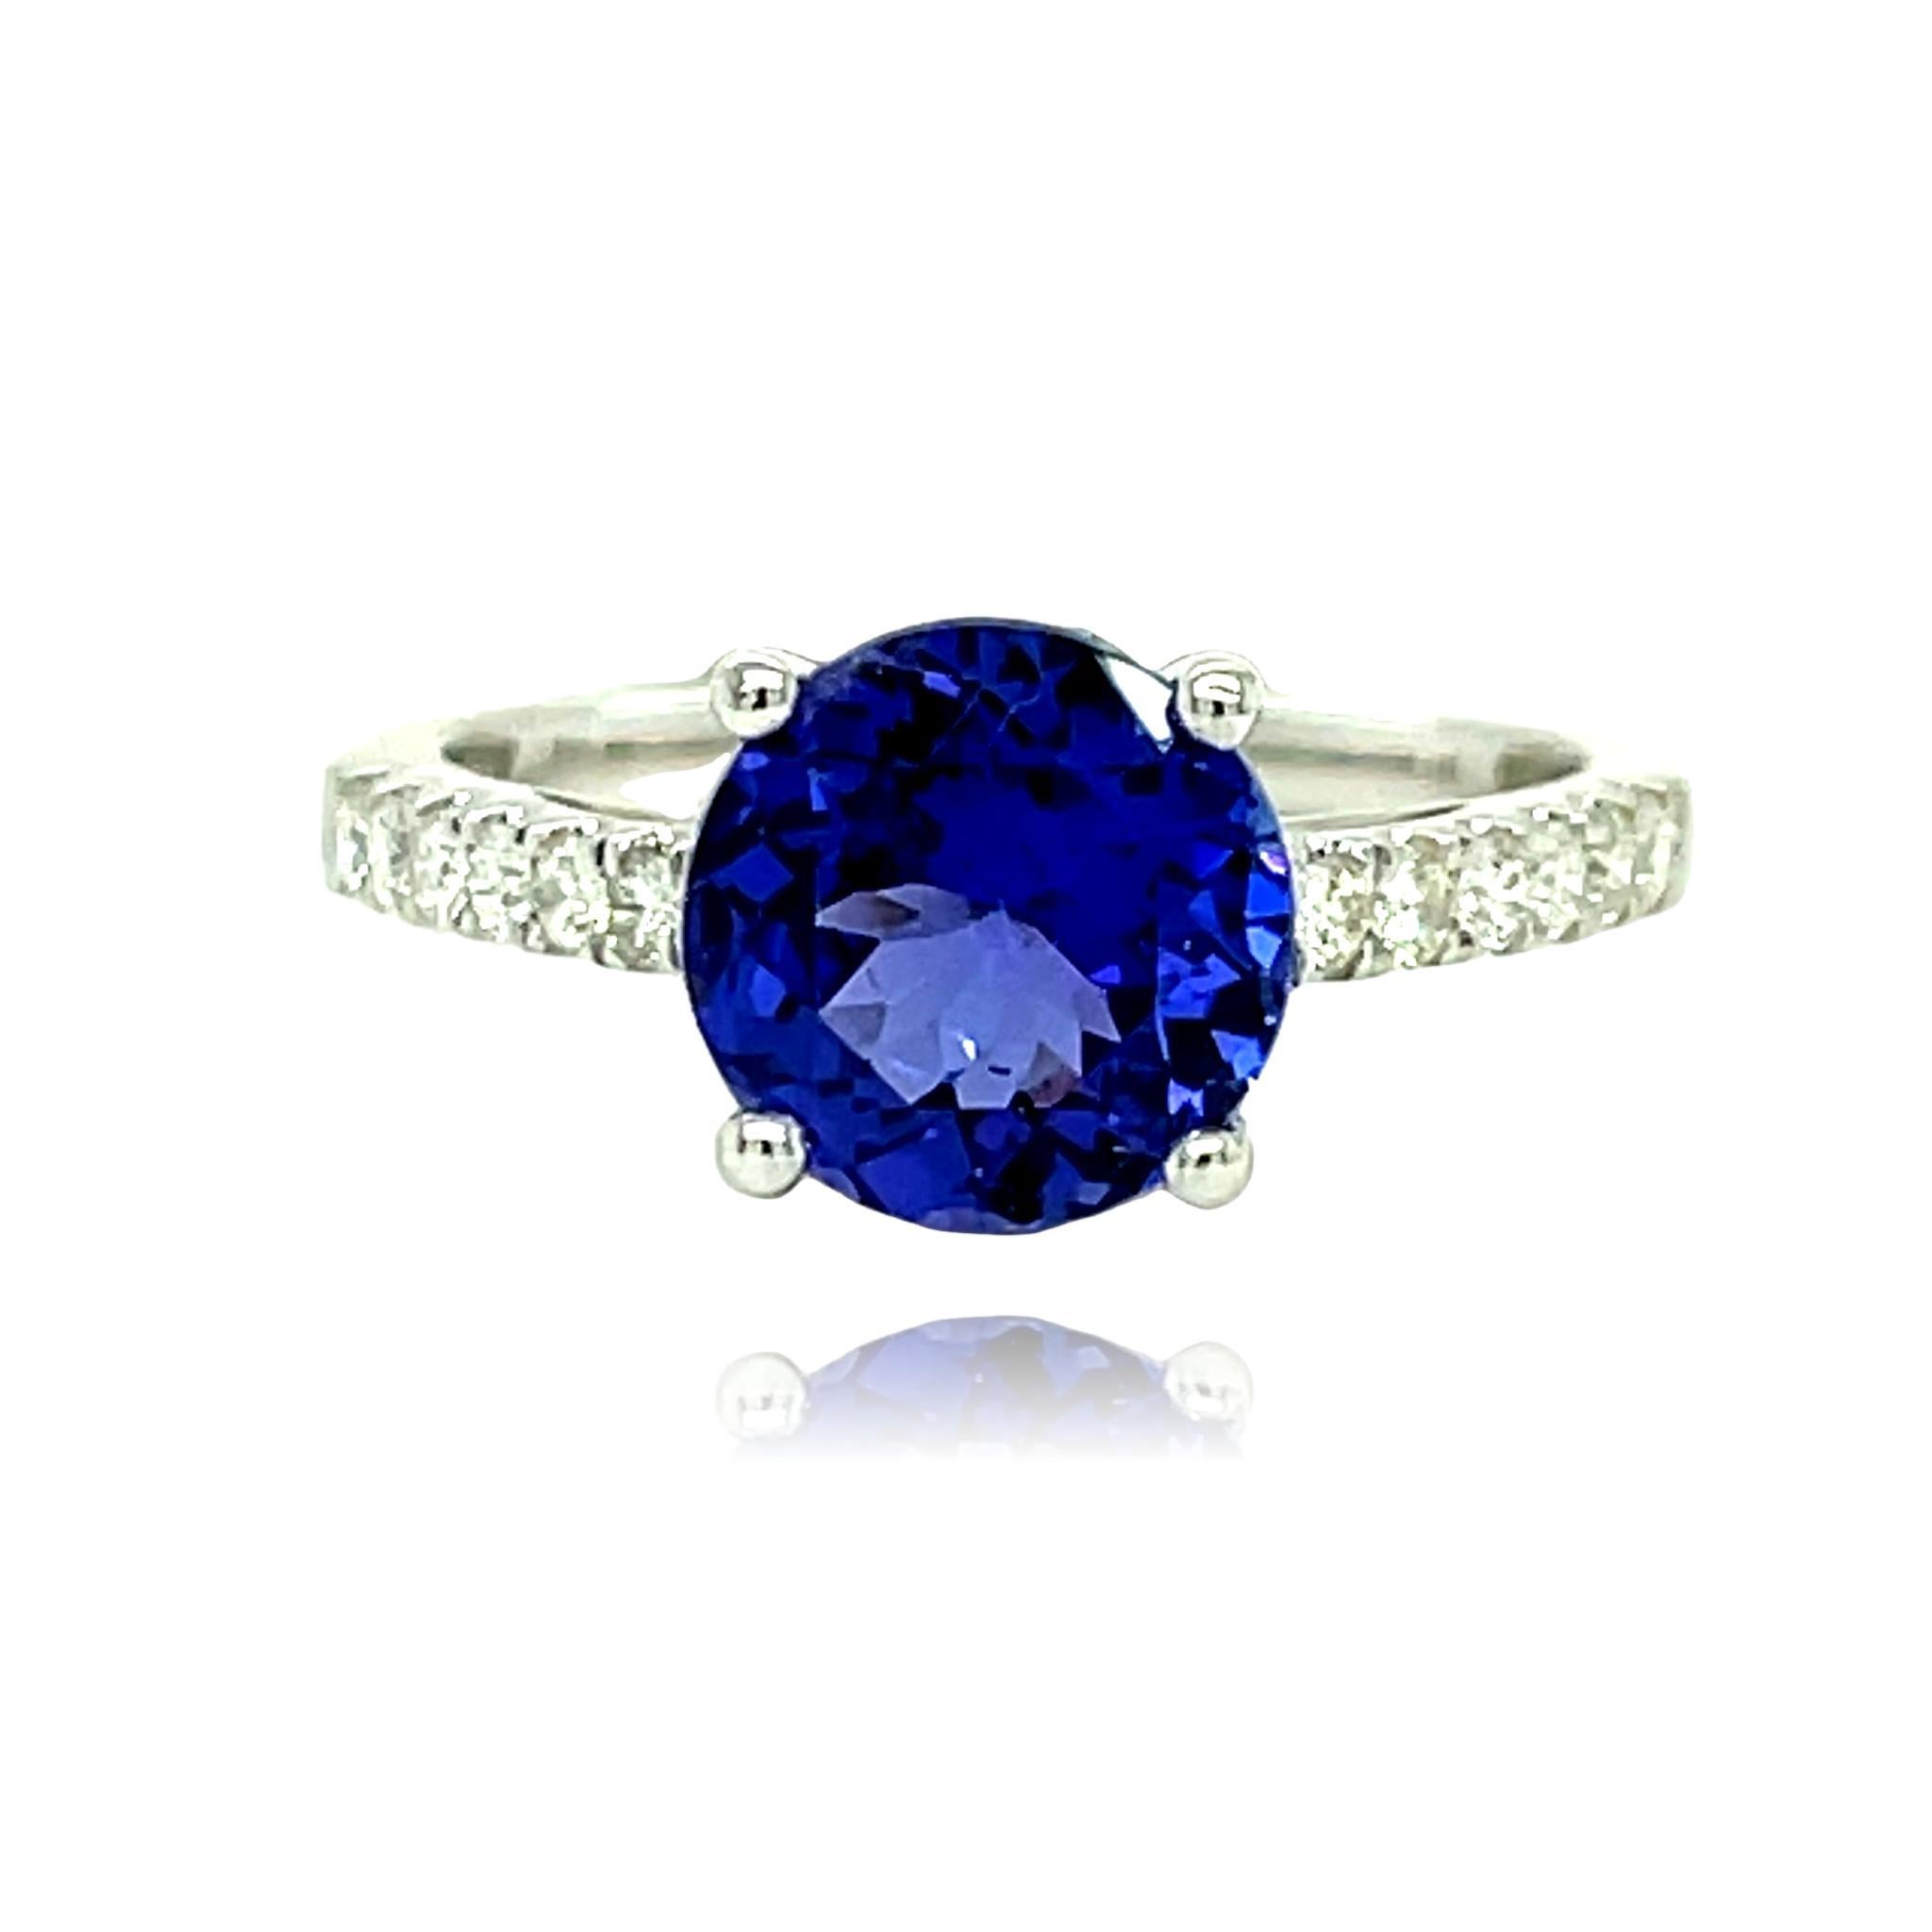 This stunning ring has a deep blue AAA quality solitaire Tanzanite with sparkling diamonds on the shank and is set in 18K white gold. It comes in a beautiful box ready for the perfect gift!

18KW:            3.30 gms
Tanz wt:         2.37 cts
Tanz